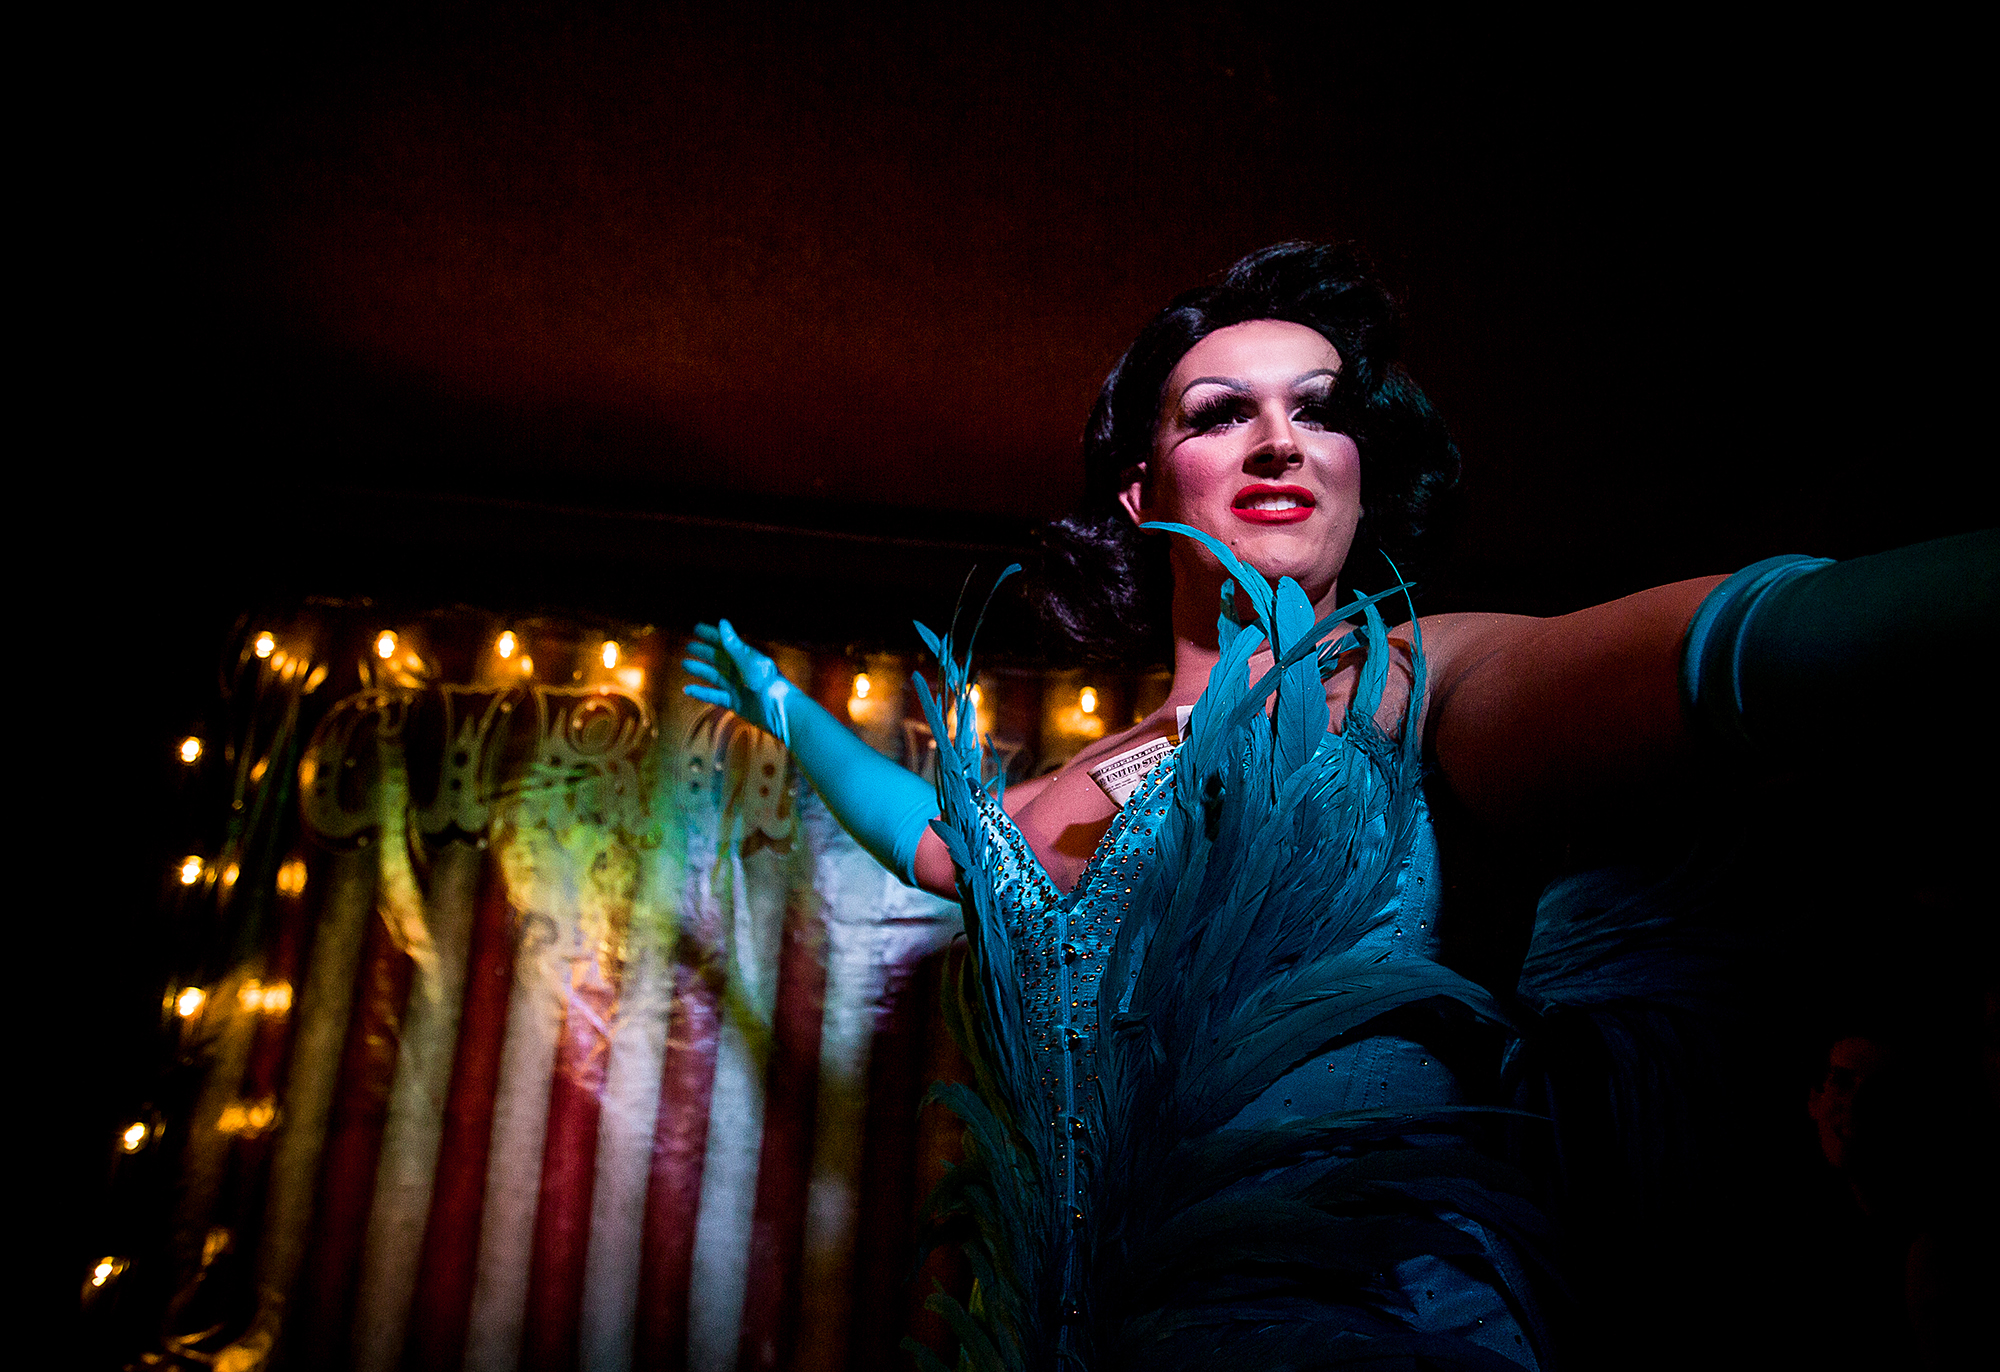  A drag queen performs at Circus a bi-monthly event at Renegades bar in San Jose California.  